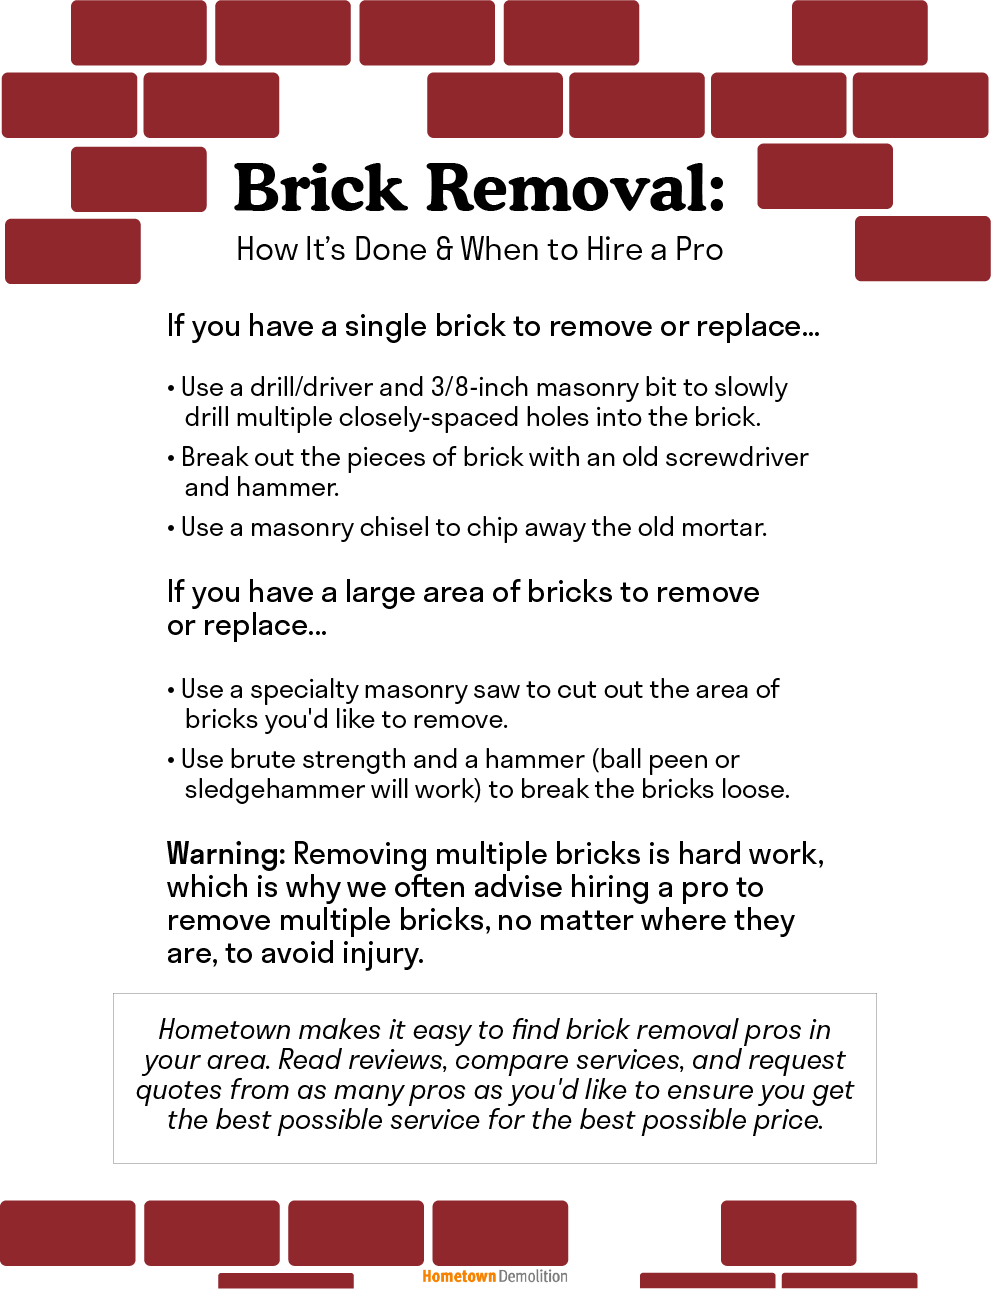 brick removal infographic